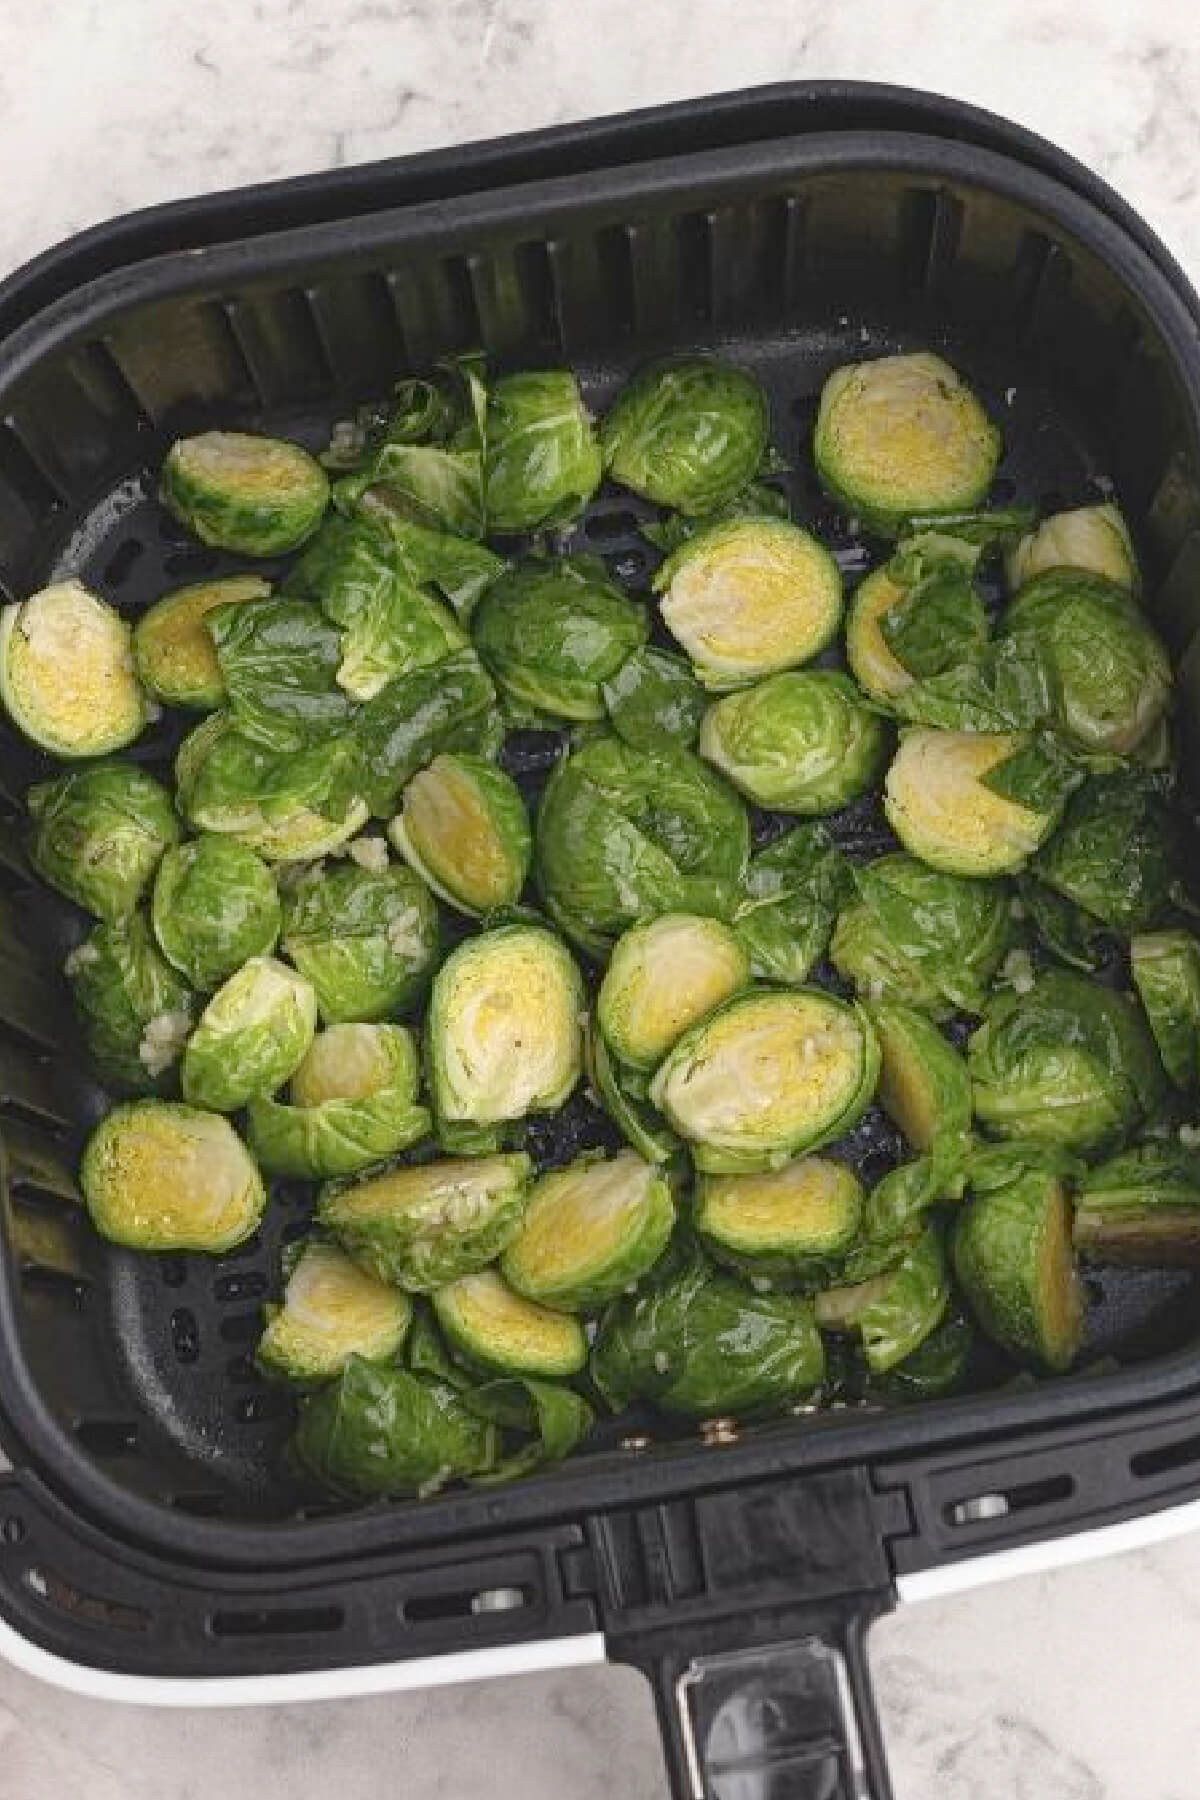 Prepared Brussels sprouts in the basket of the air fryer, ready to be cooked.